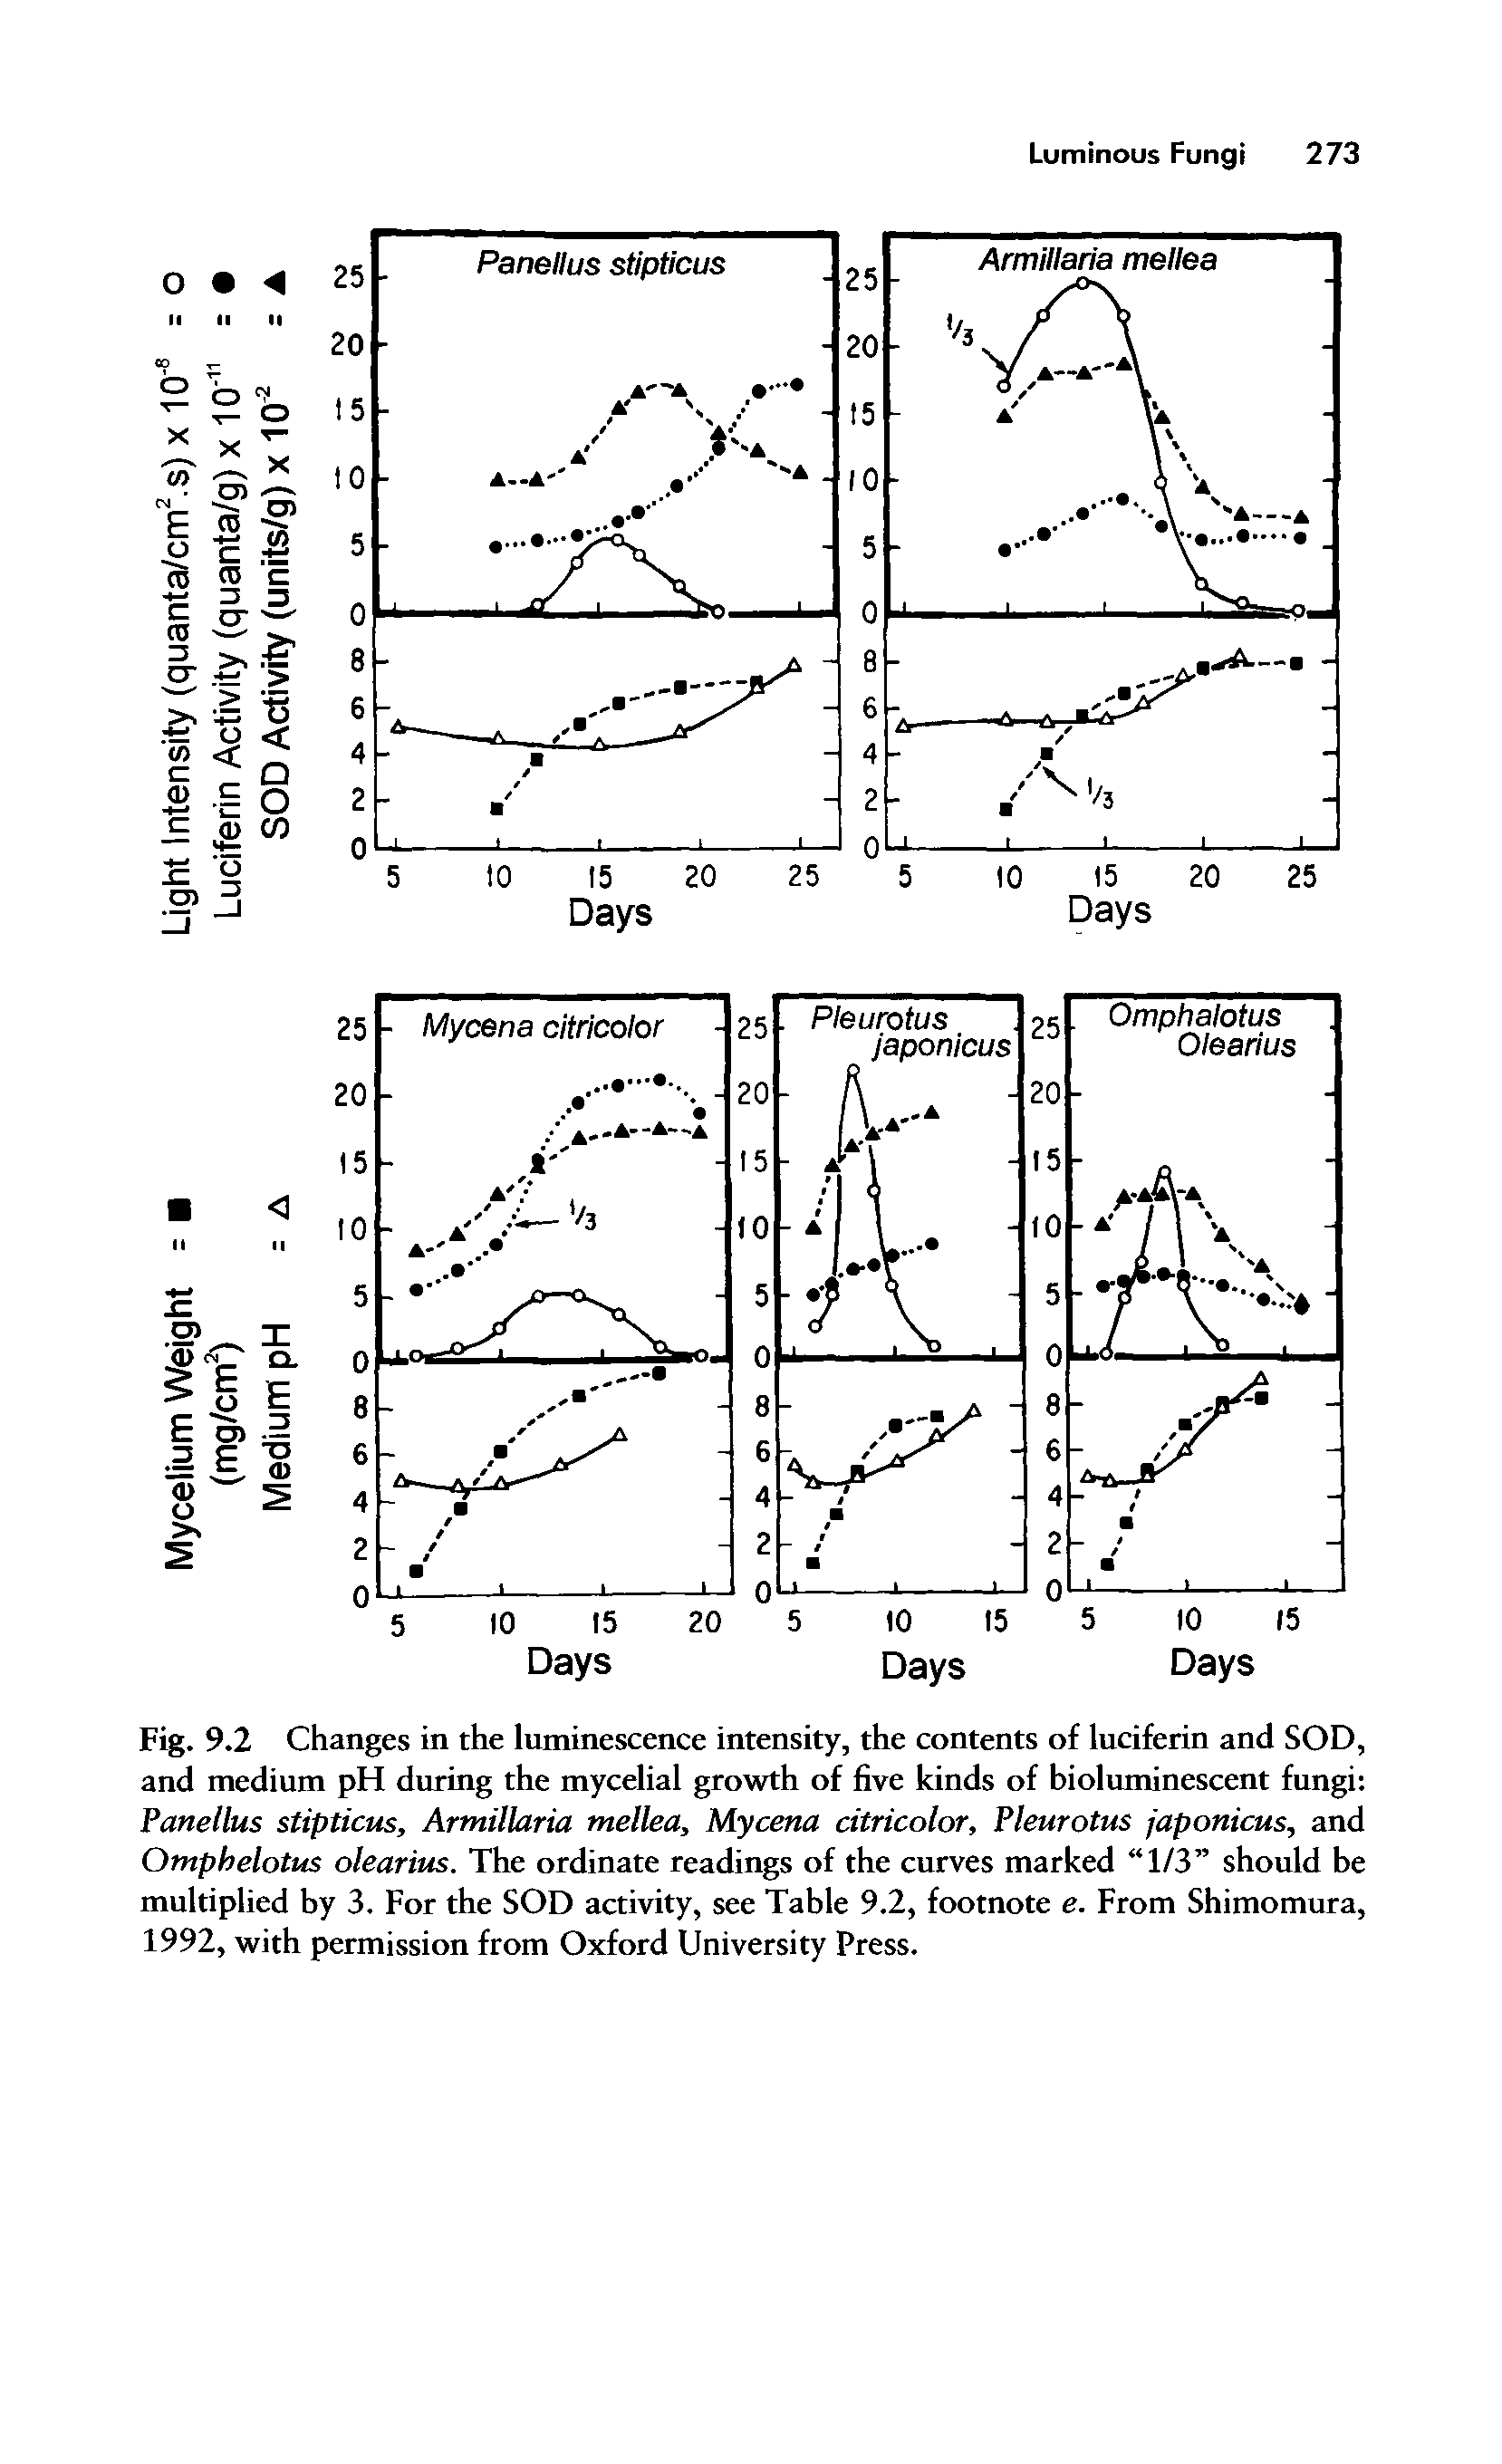 Fig. 9.2 Changes in the luminescence intensity, the contents of luciferin and SOD, and medium pH during the mycelial growth of five kinds of bioluminescent fungi Panellus stipticus, Armillaria mellea, Mycena citricolor, Pleurotus japonicus, and Omphelotus olearius. The ordinate readings of the curves marked 1/3 should be multiplied by 3. For the SOD activity, see Table 9.2, footnote e. From Shimomura, 1992, with permission from Oxford University Press.